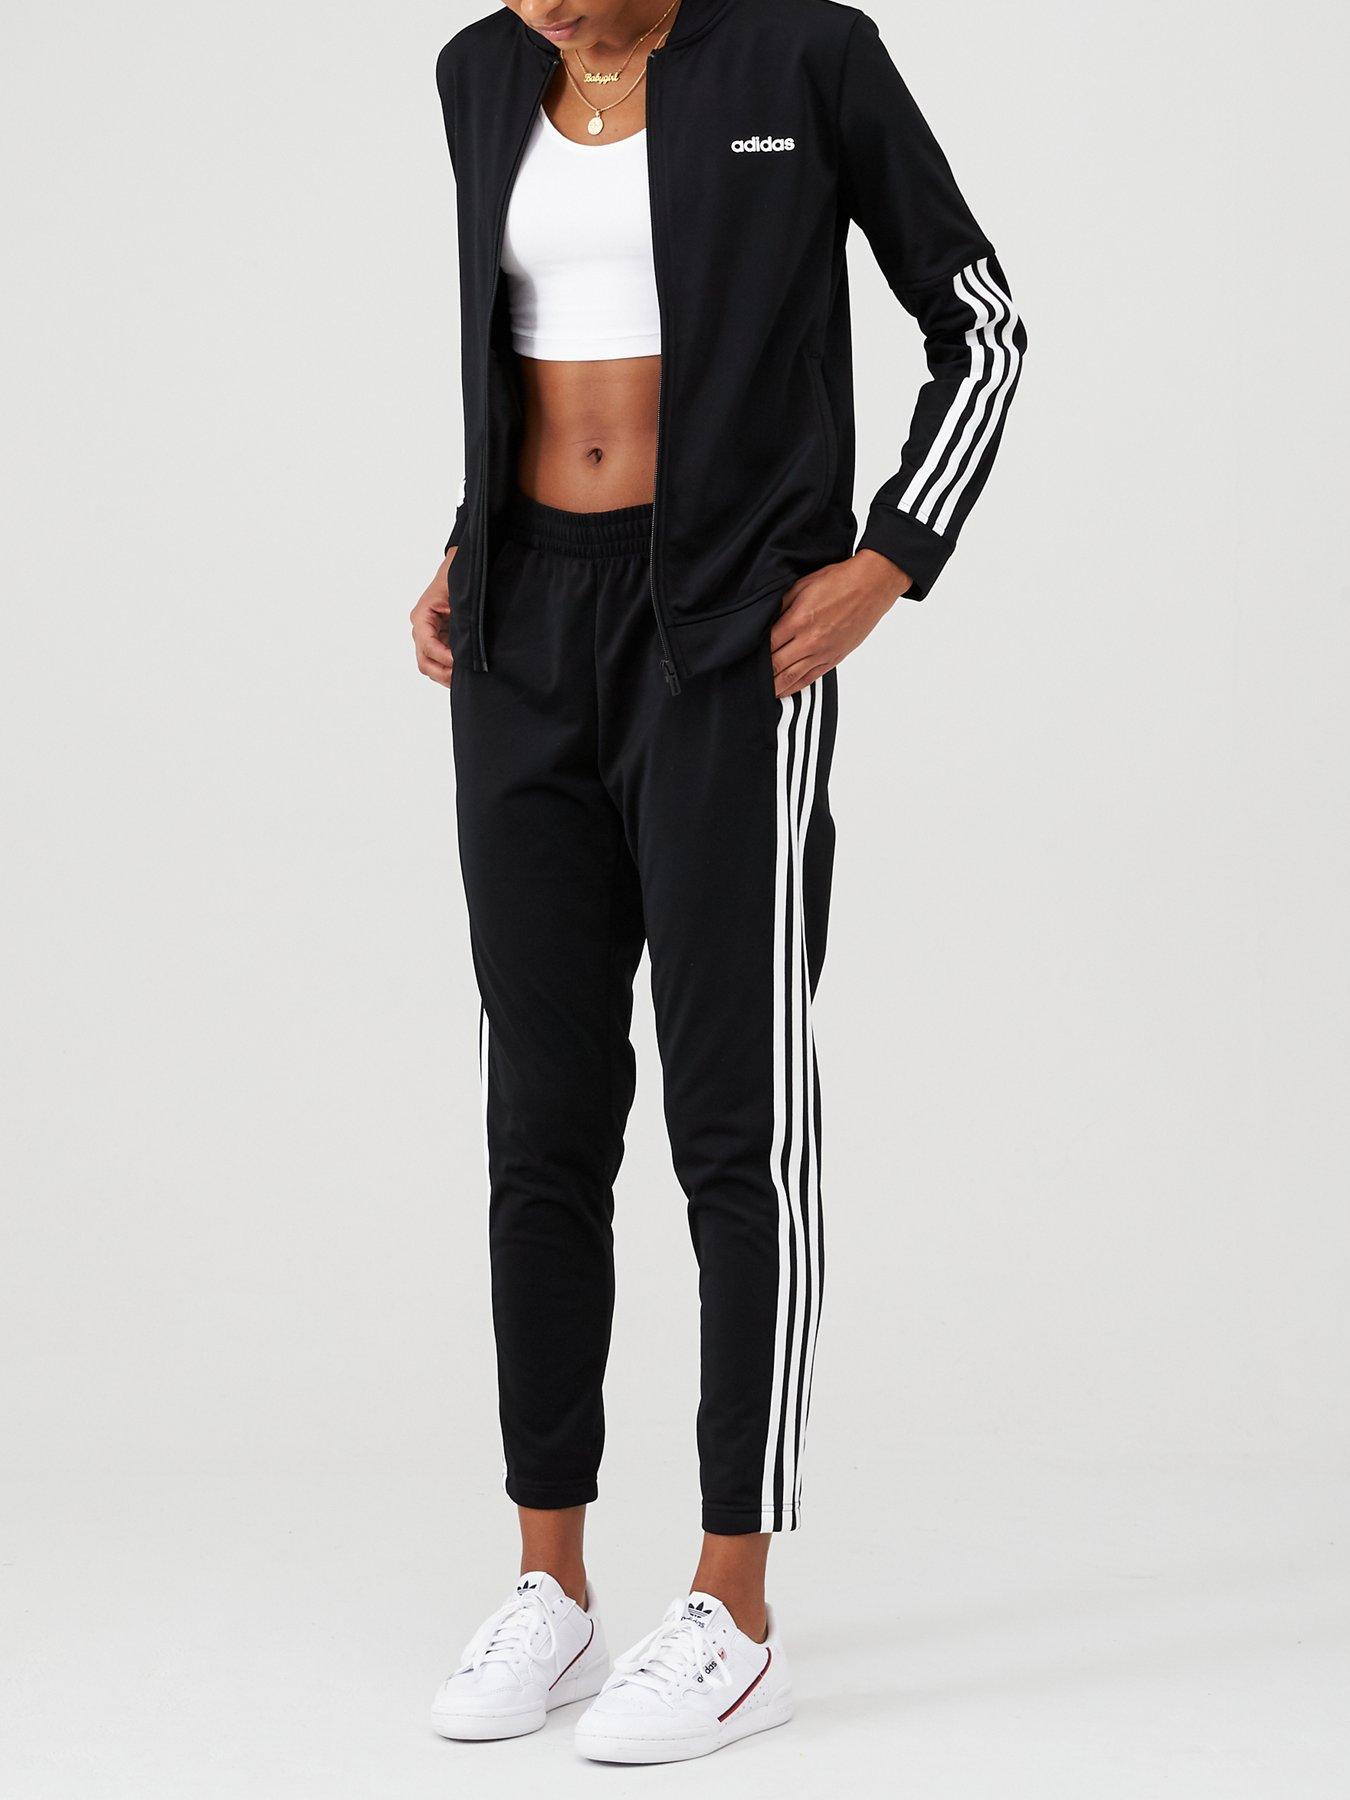 pink and black adidas tracksuit